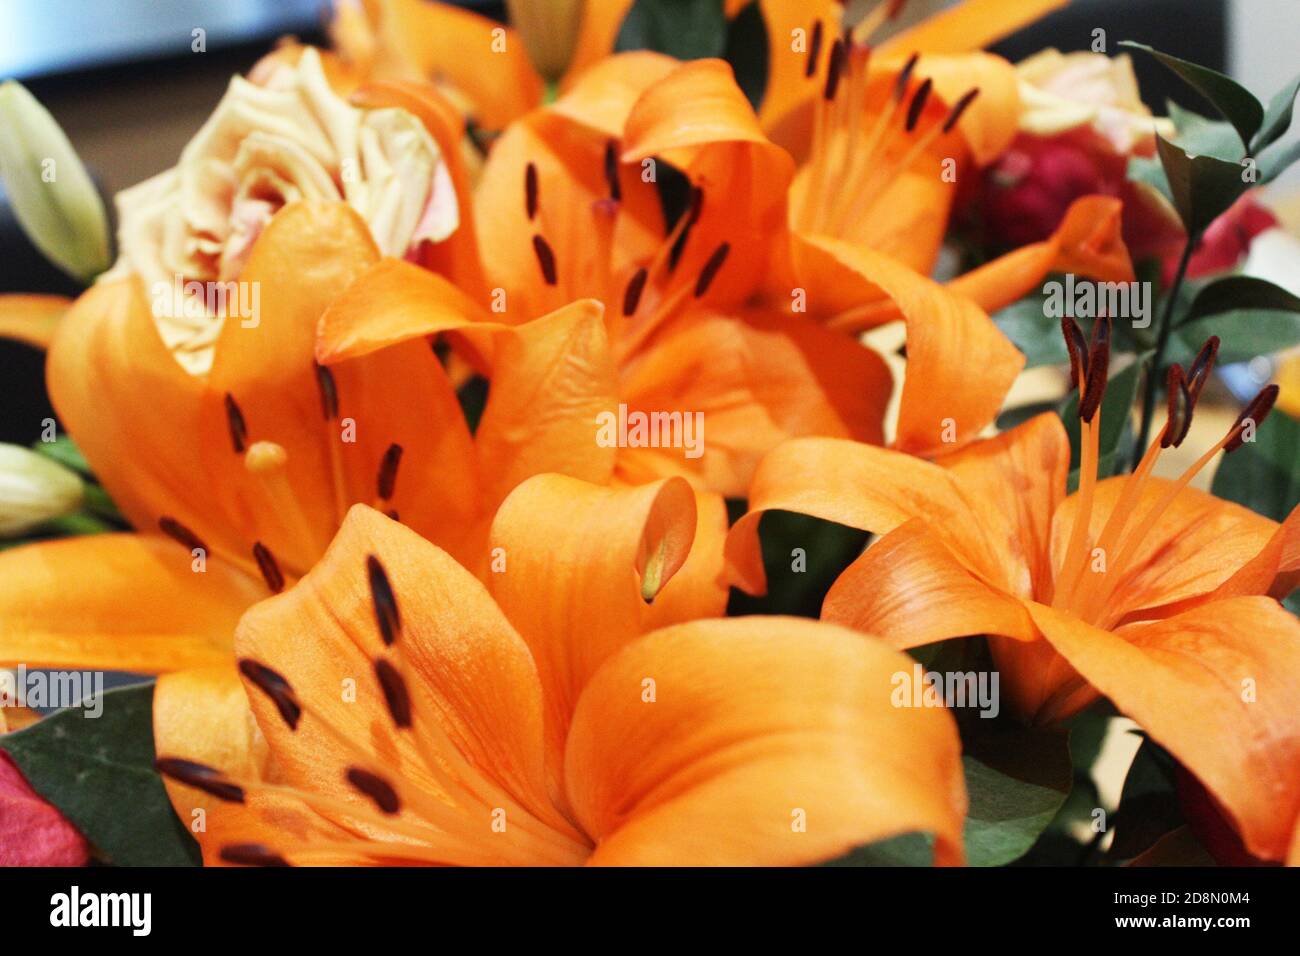 Close up bouquet/bunch of Orange County king lilies (Lilium) and orange roses (Rosa), orange flowers Stock Photo